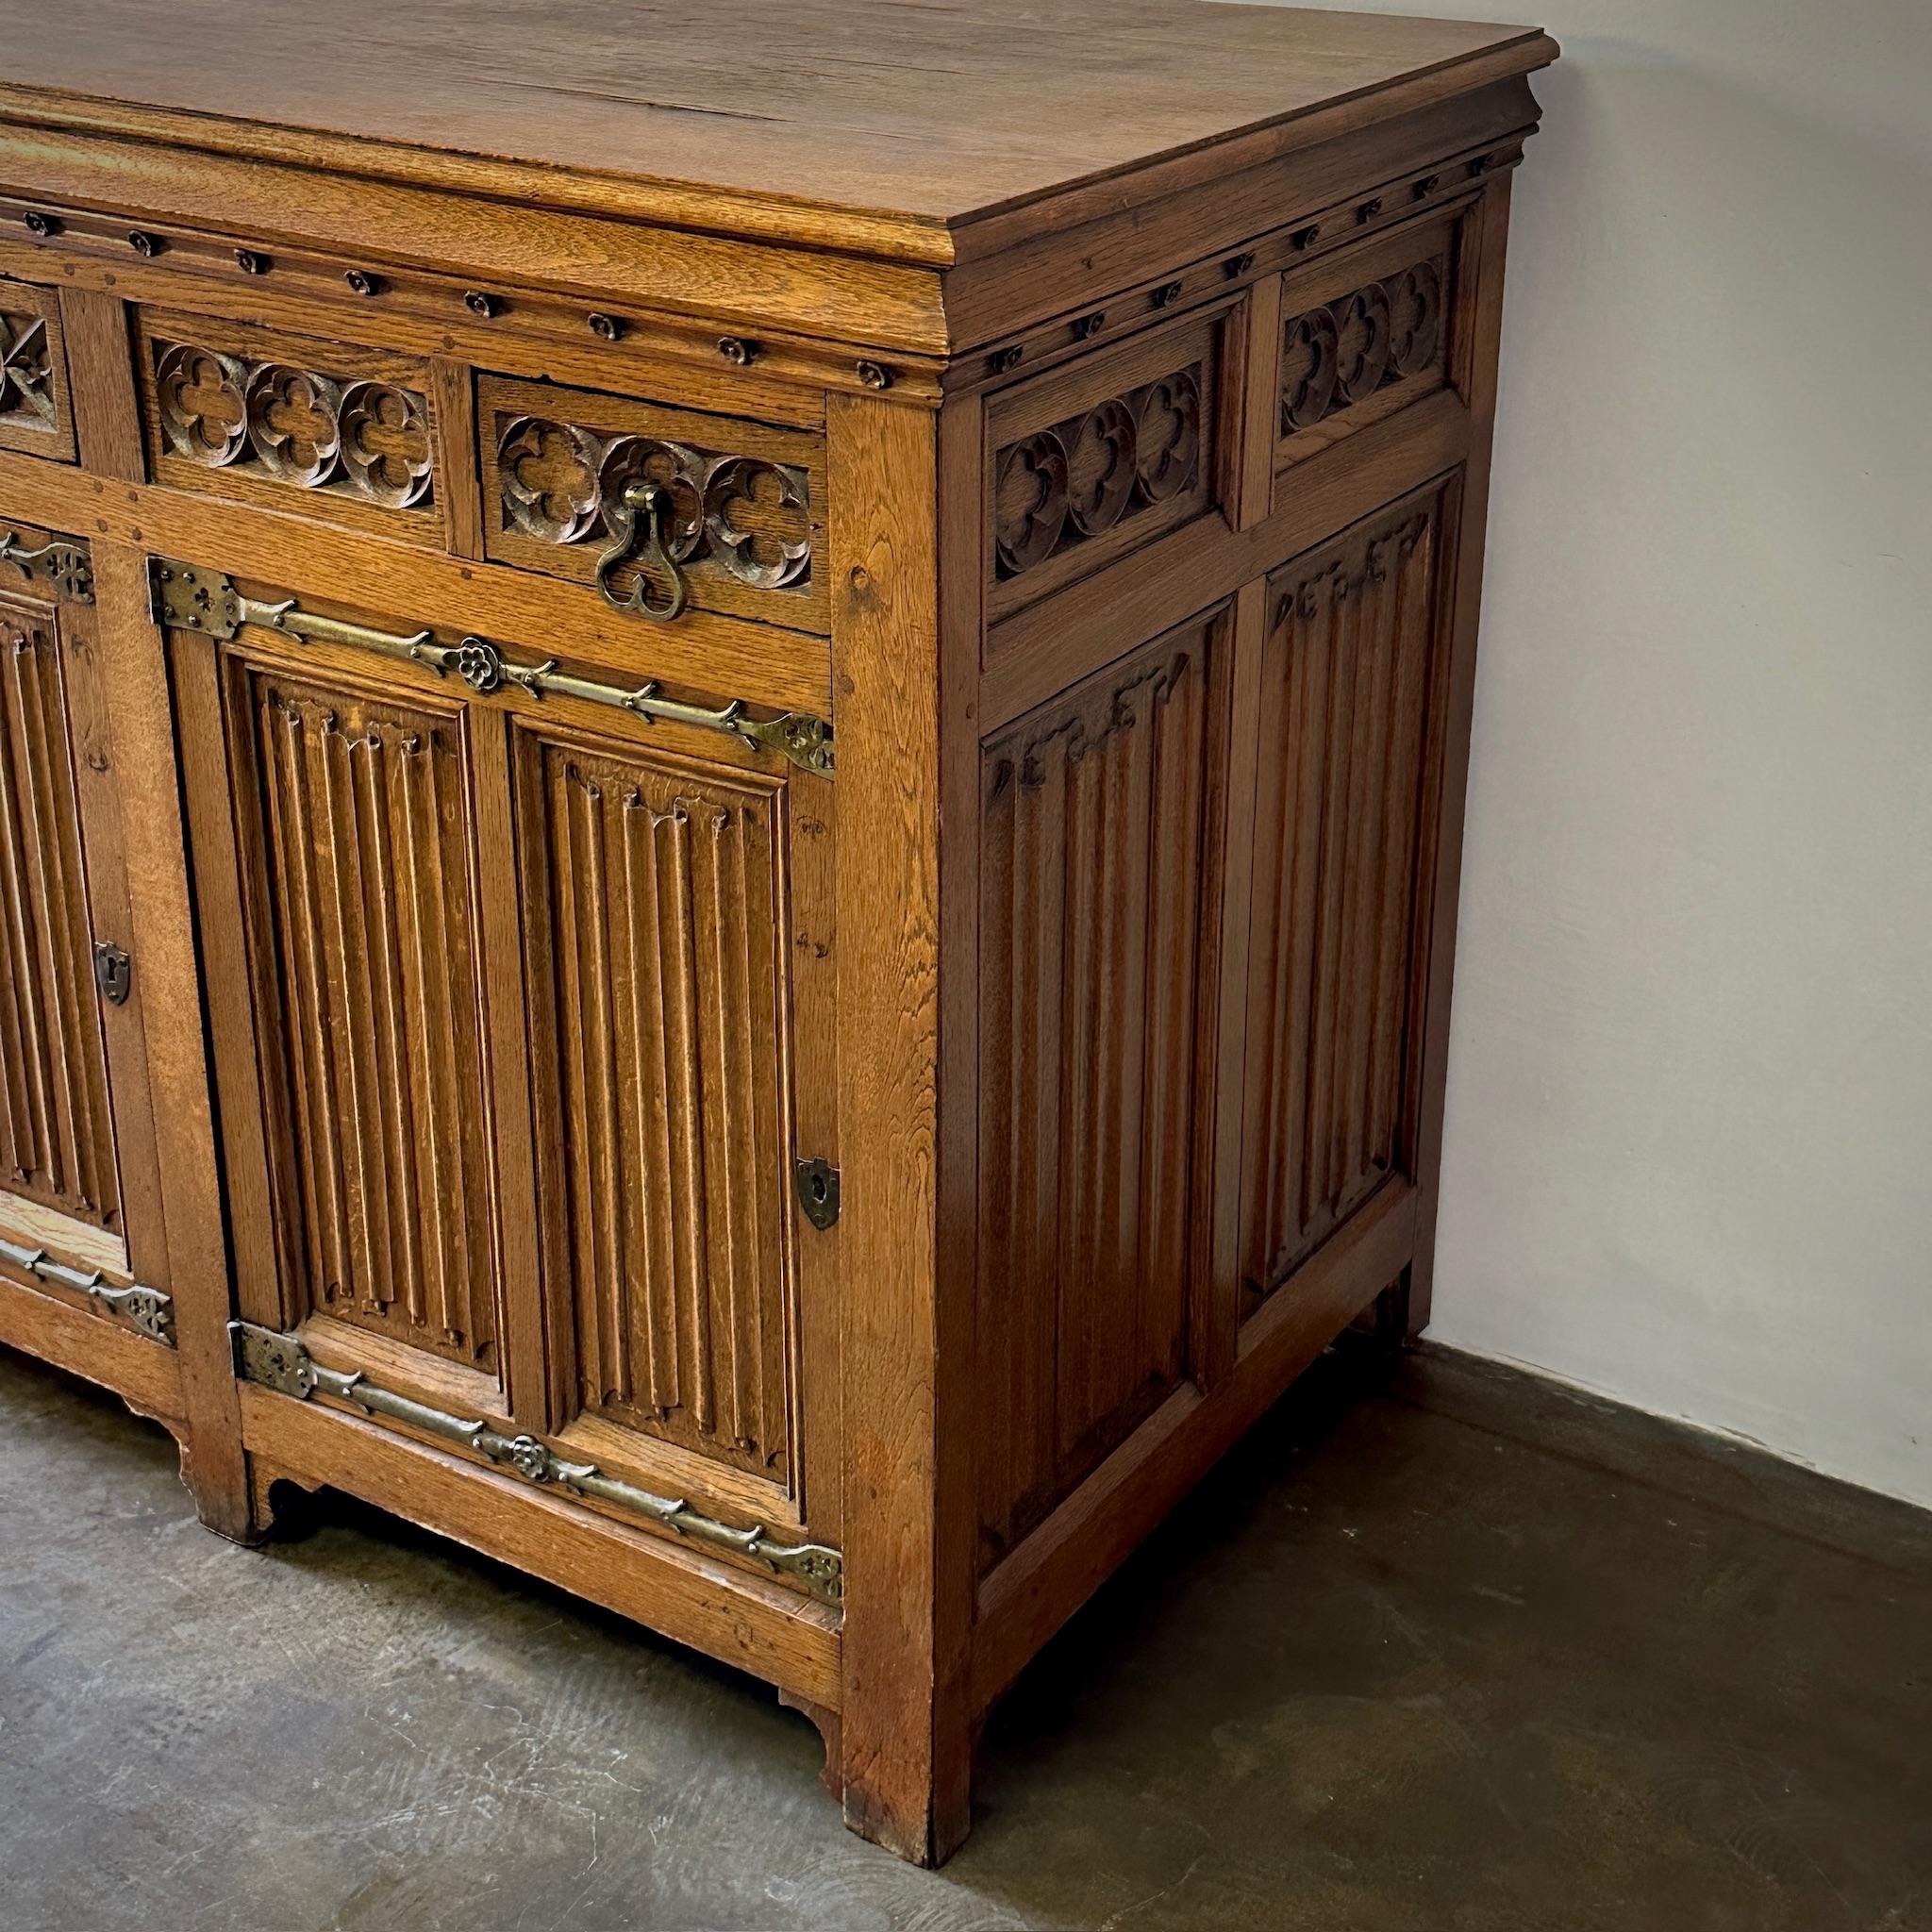 French 1830s neo-gothic sideboard in a handsome dark oak. Features beveled cupboards with interior shelving and three carved drawers with wrought iron hardware. A classic 19th century piece with an understated sense of gravitas.

France, circa